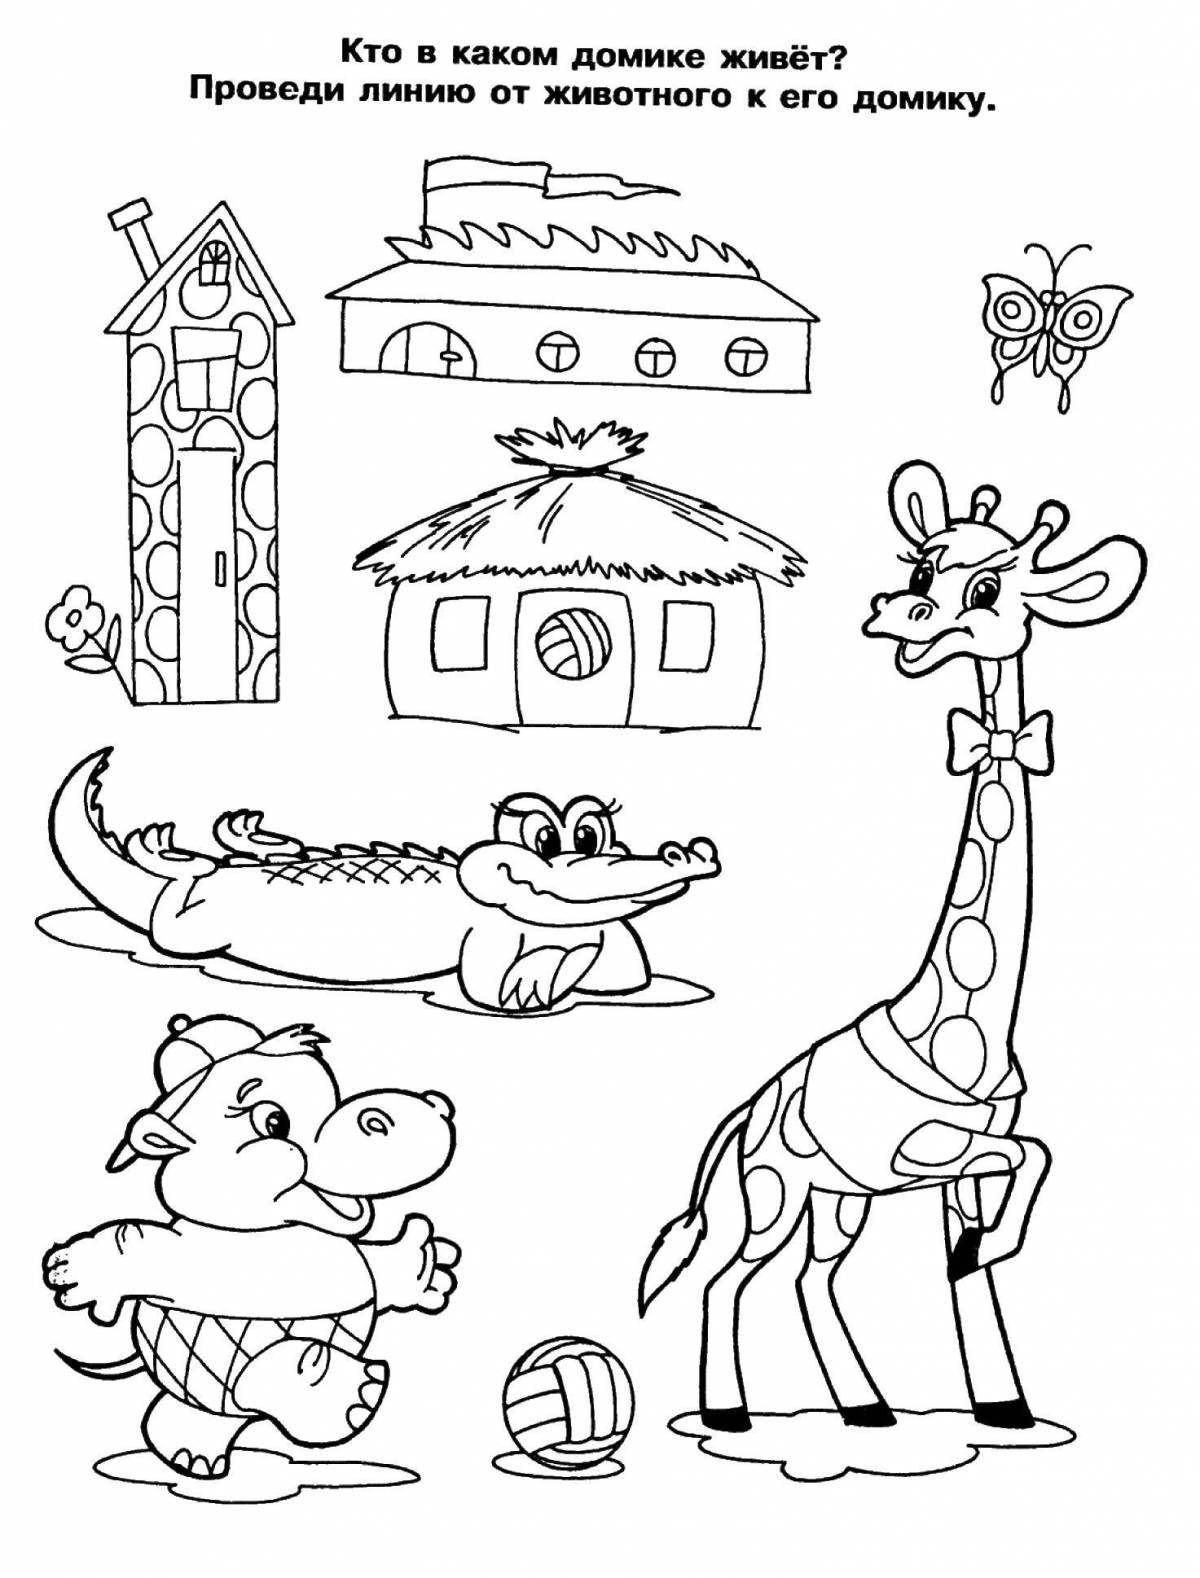 Fun coloring book for 4-5 year olds